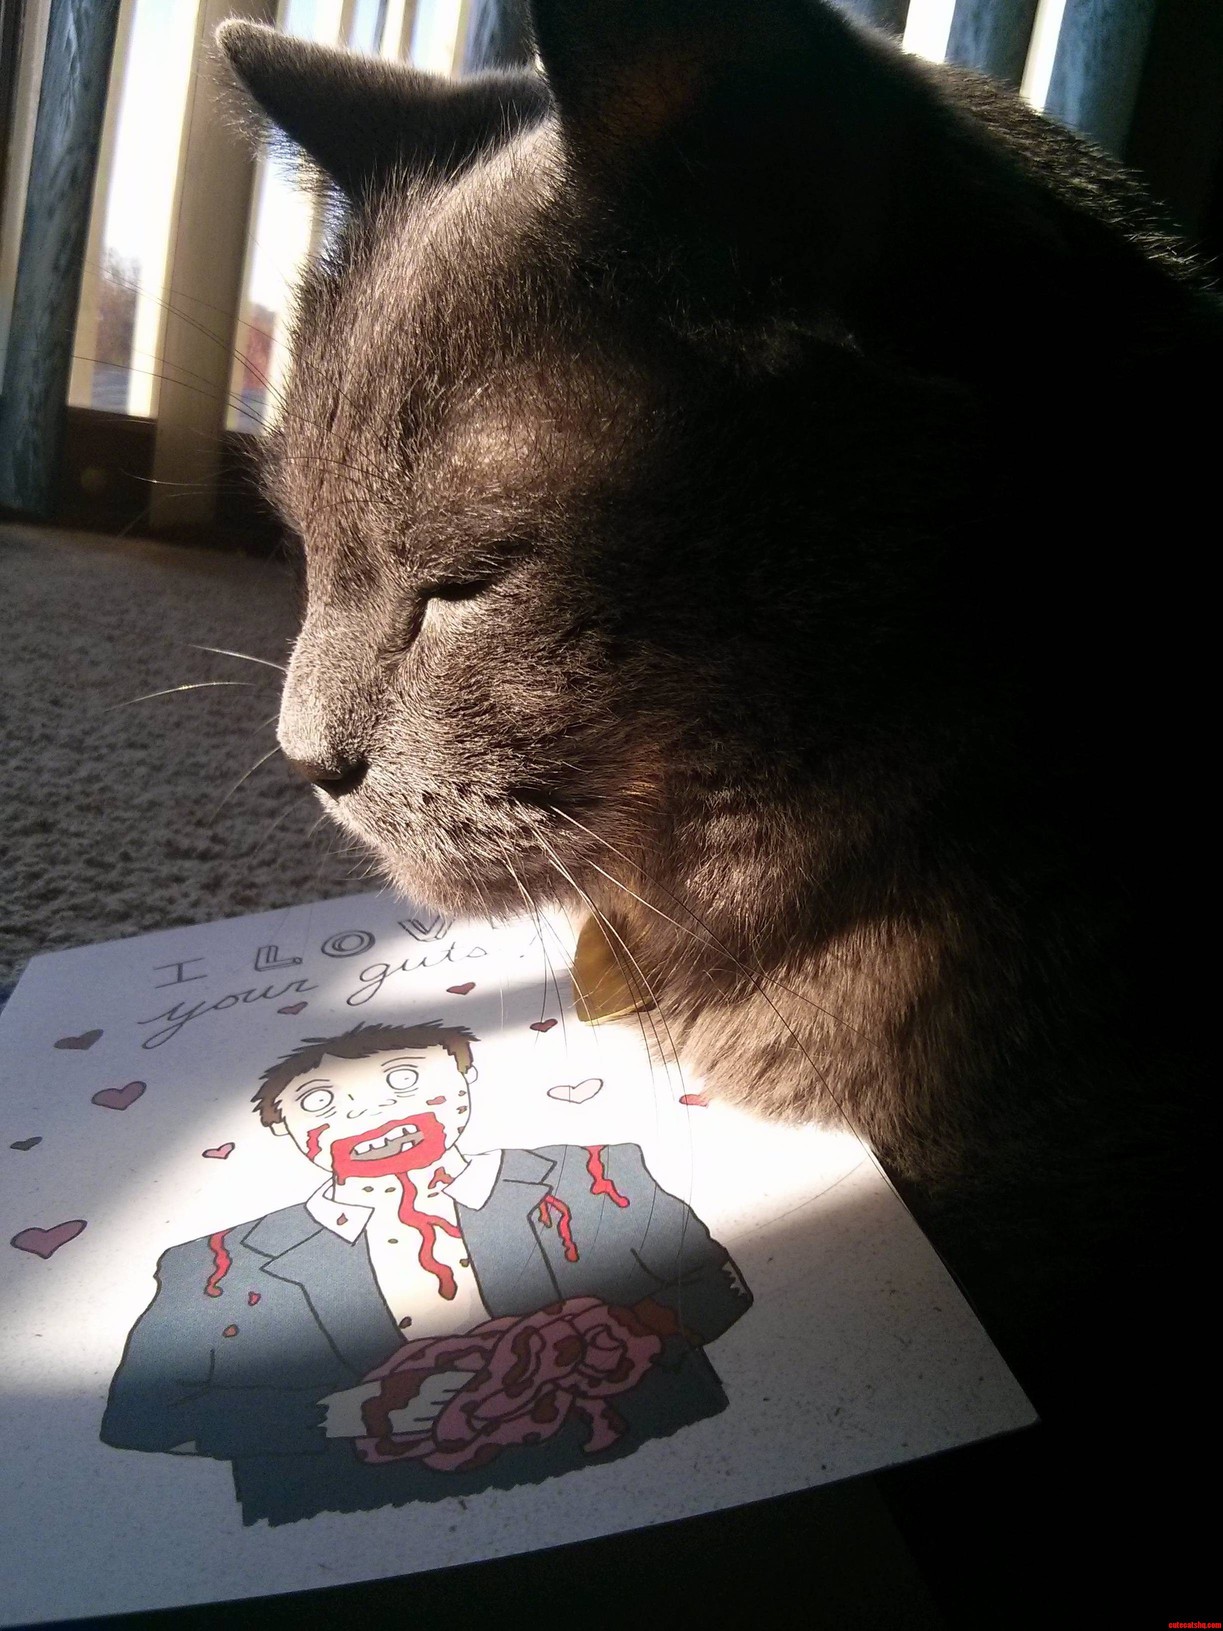 For Some Reason He Loves This Card.